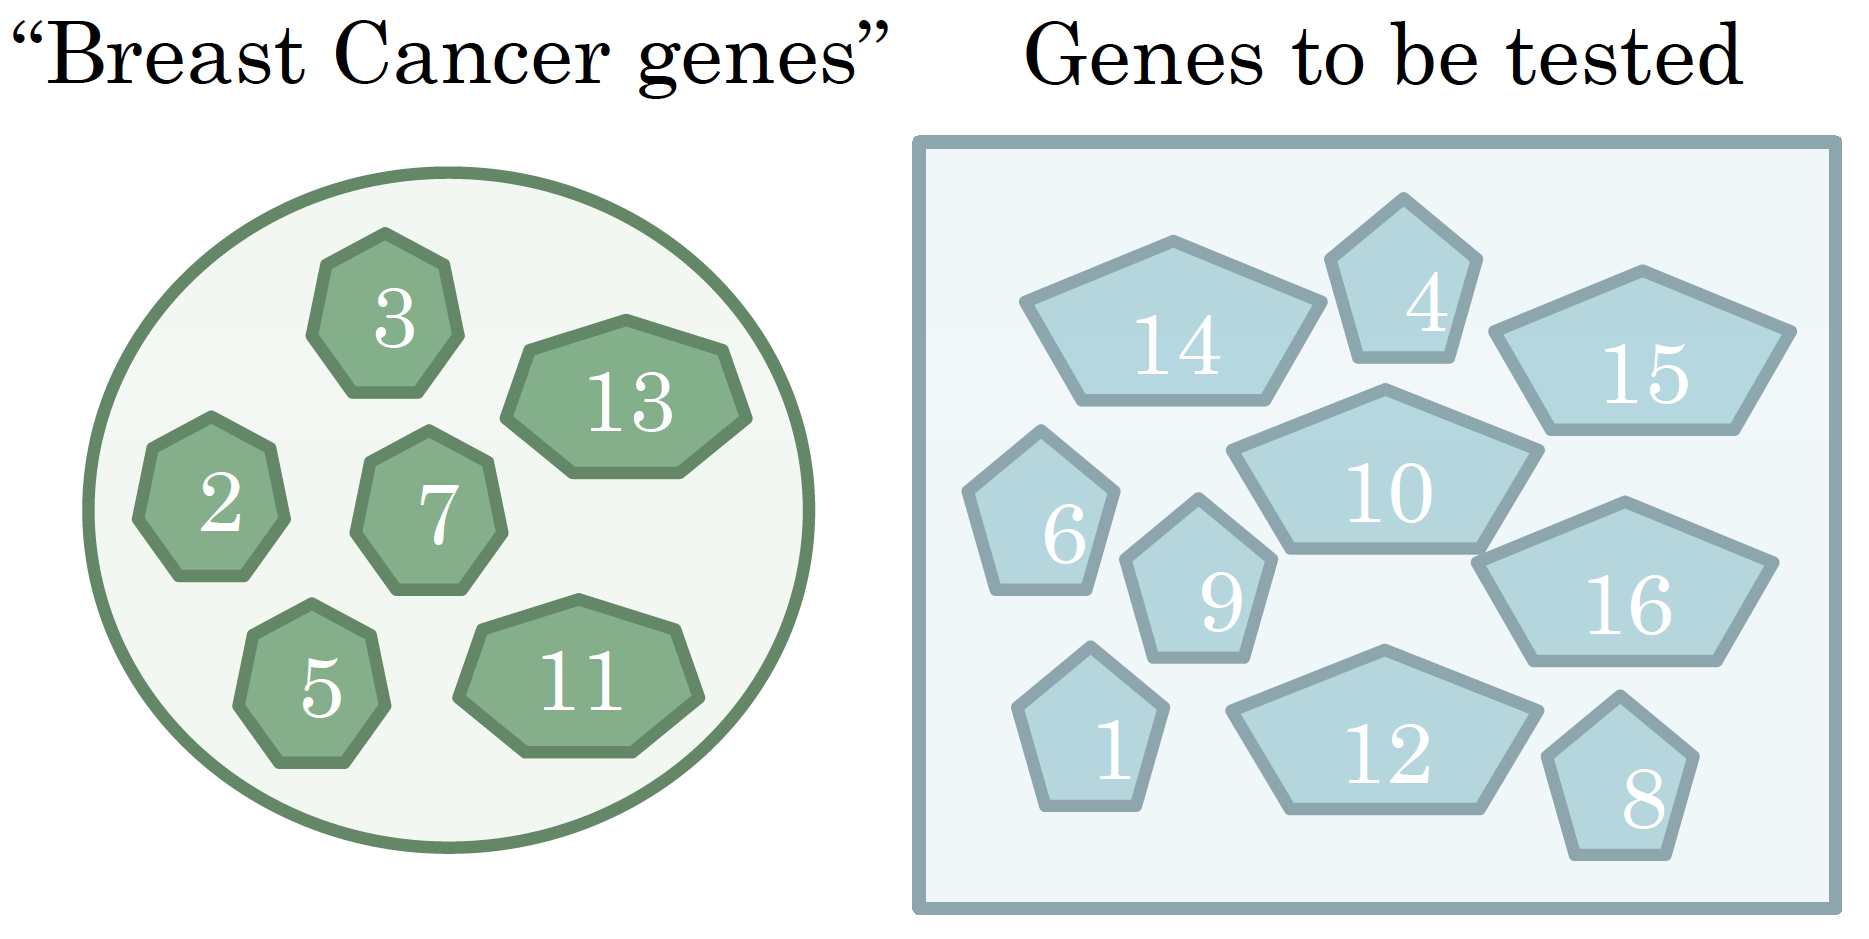 Gene Prioritization: which genes to test first? We pick the ones "most similar" to the known "Breast Cancer genes". 